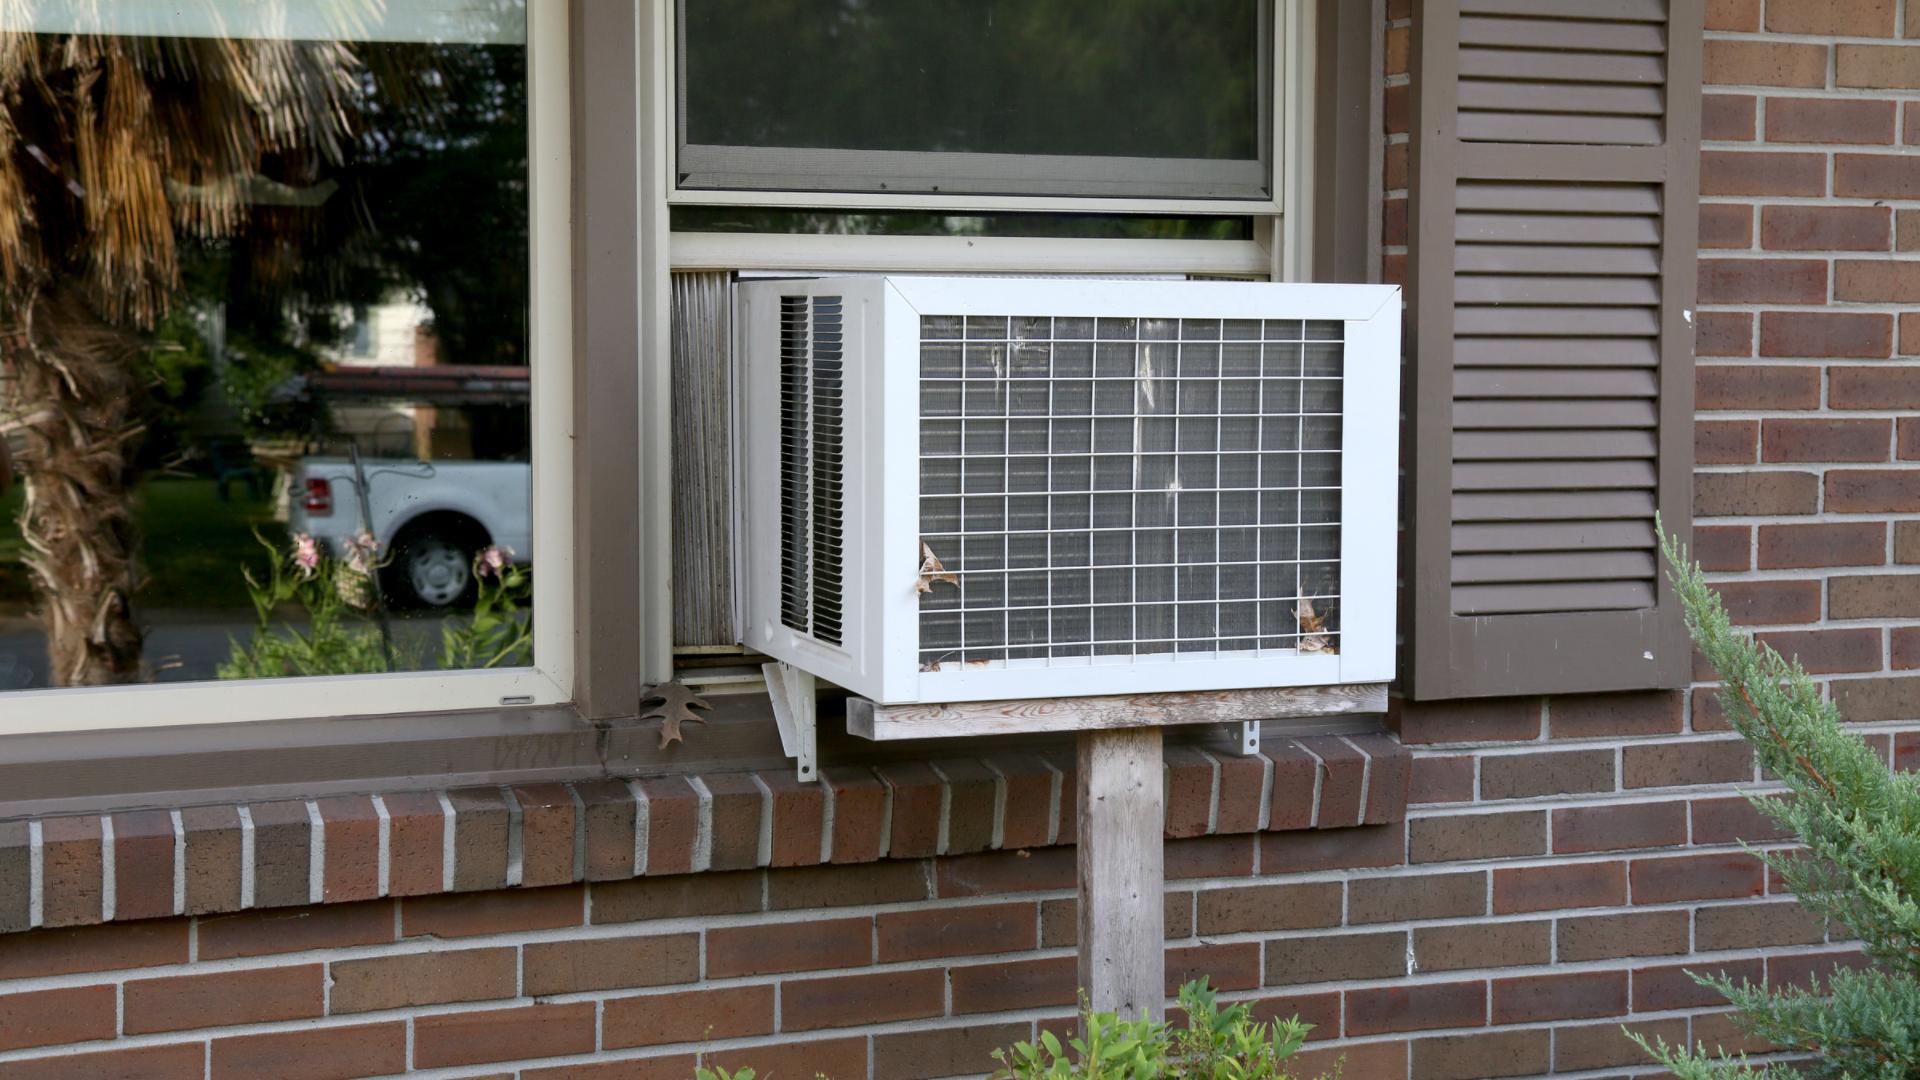 Shopping for a Small Window Air Conditioner? Read This!